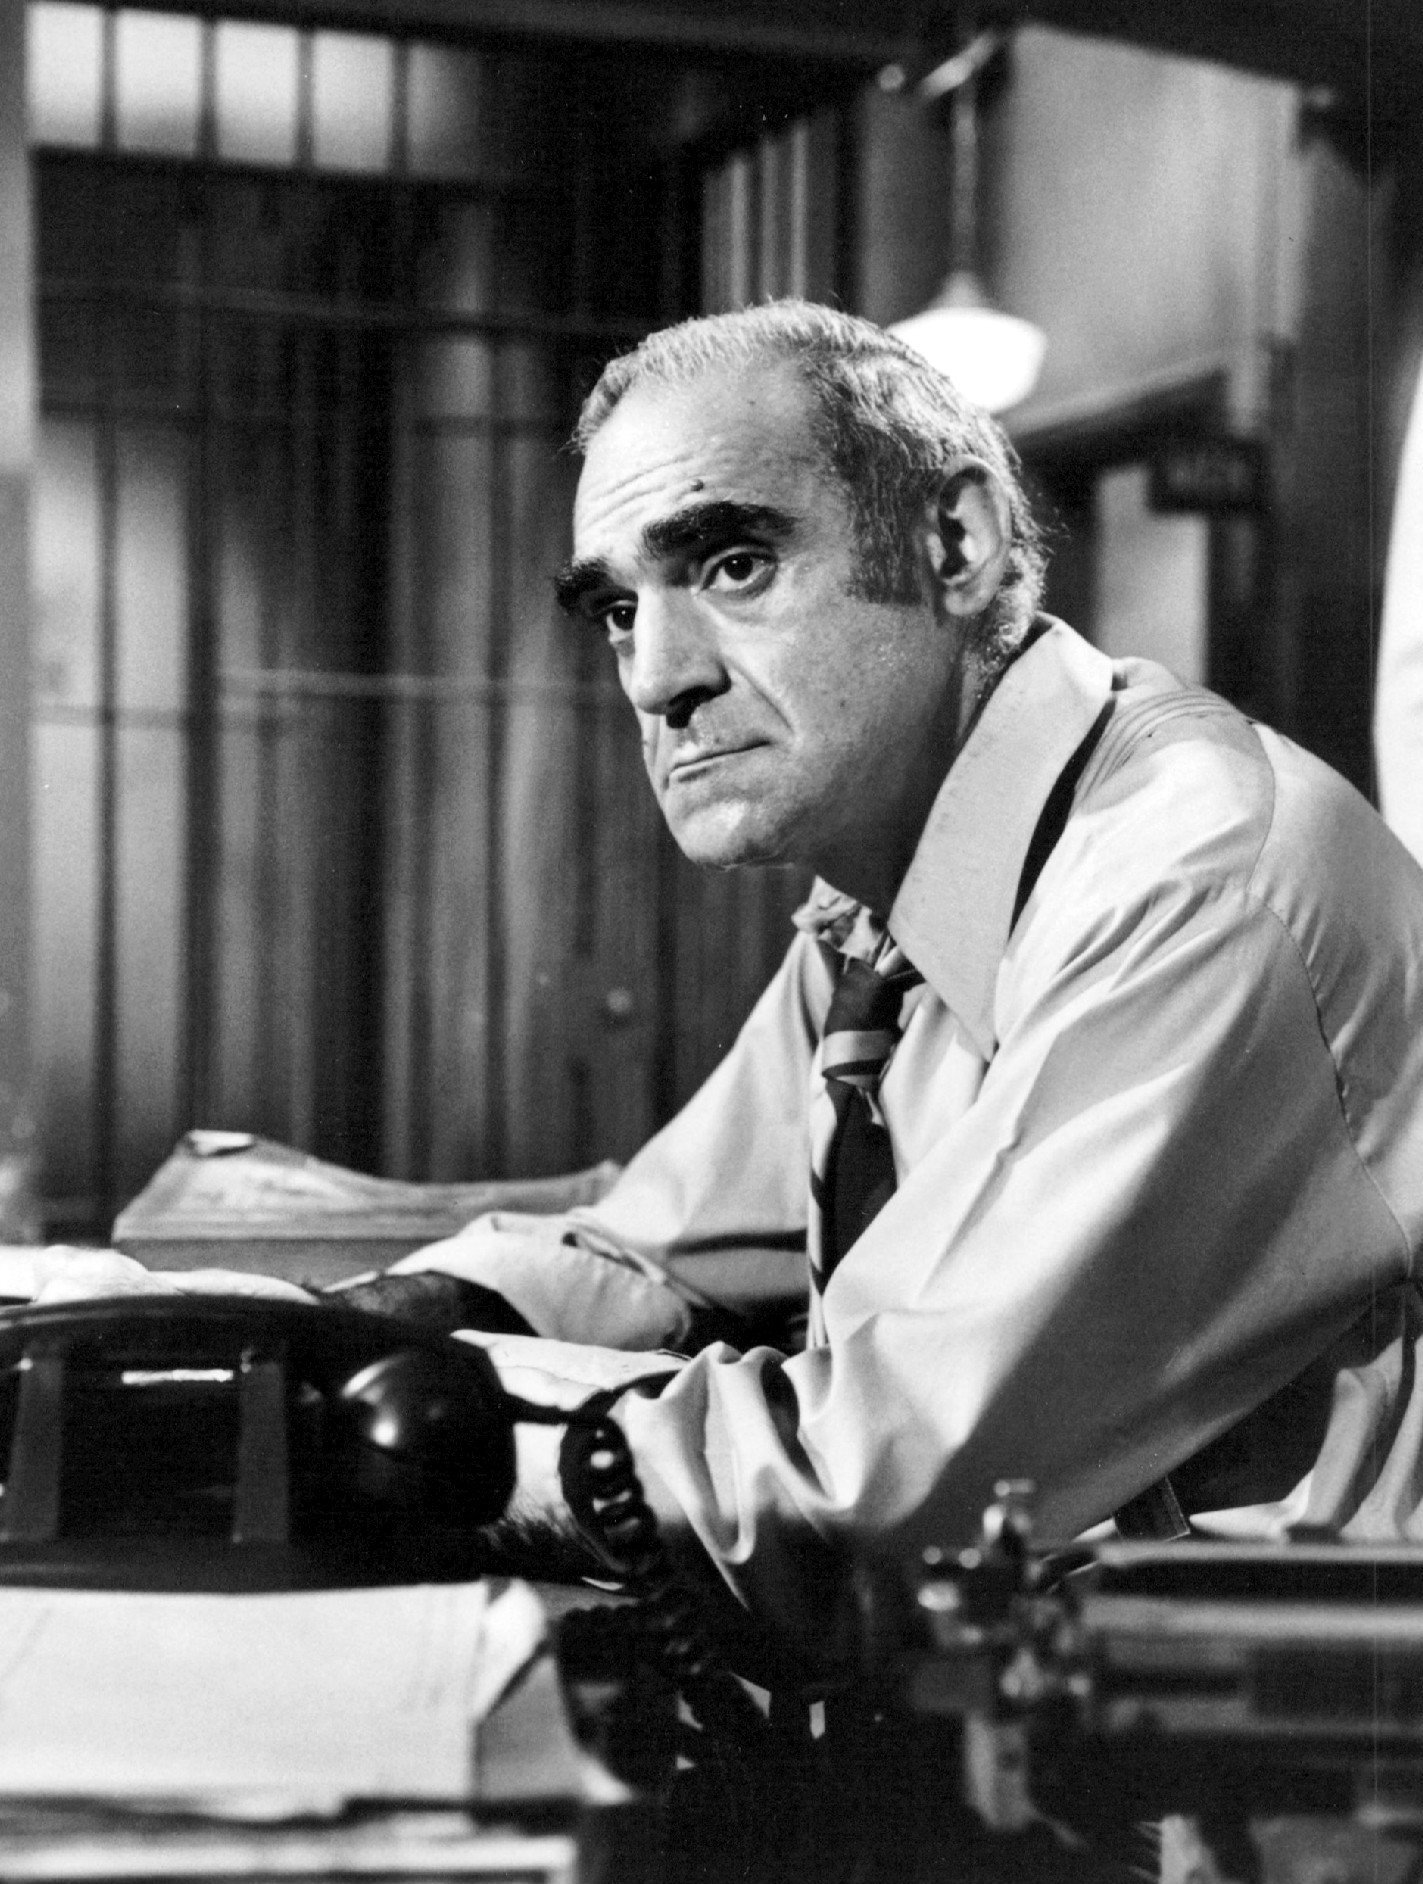 Abe Vigoda as Detective Phil Fish from the television program "Barney Miller" | Source: Wikimedia Commons